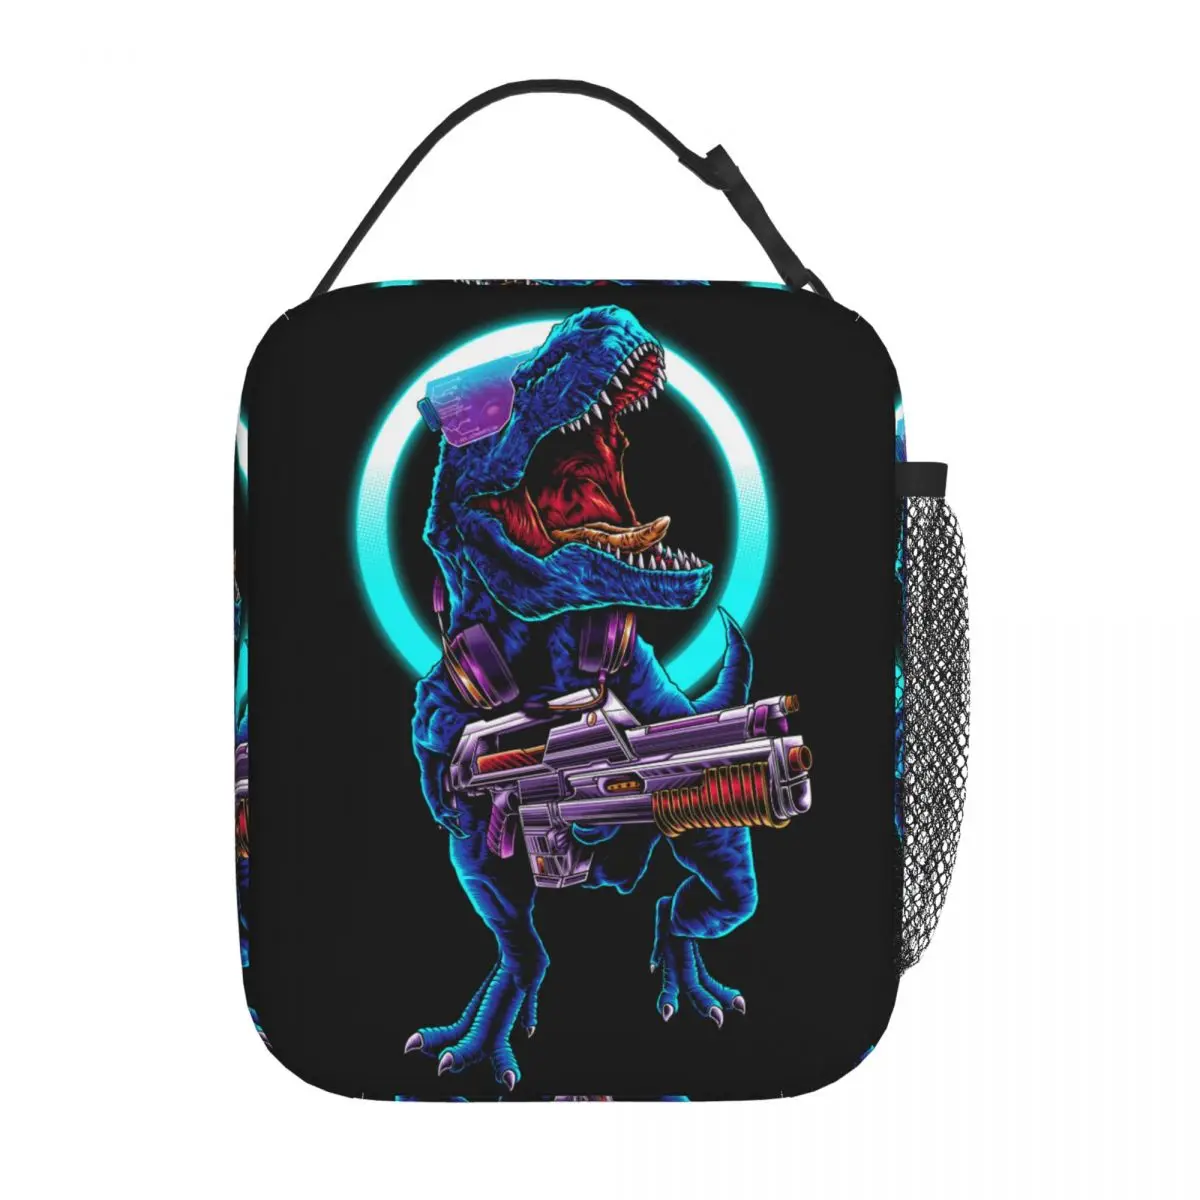 

Punk Dinosaur T-Rex Zero World Insulated Lunch Bag Lunch Container Portable Cooler Thermal Bento Box School